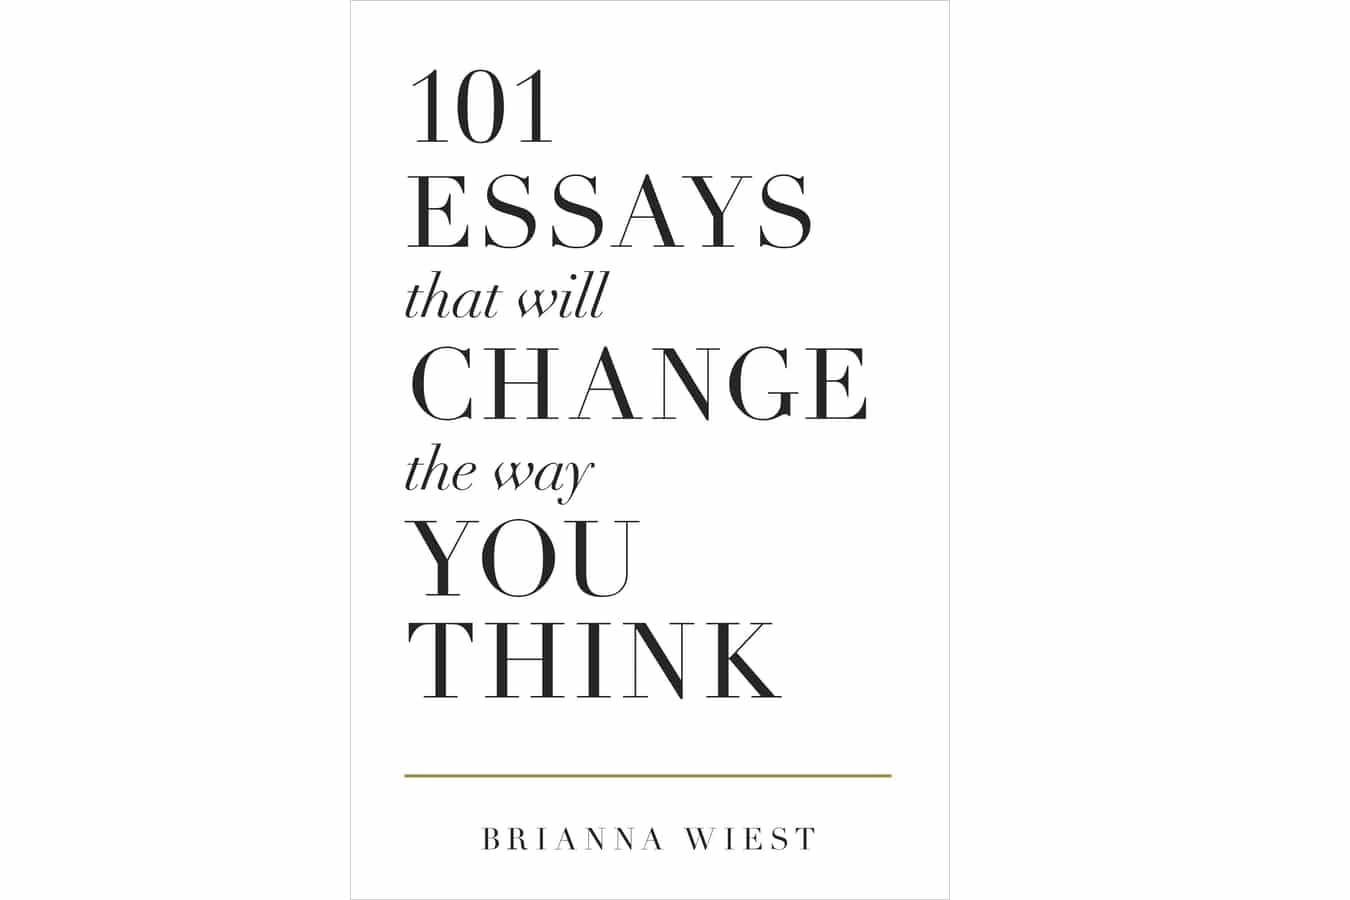 101 essays that will change the way you think by brianna wiest